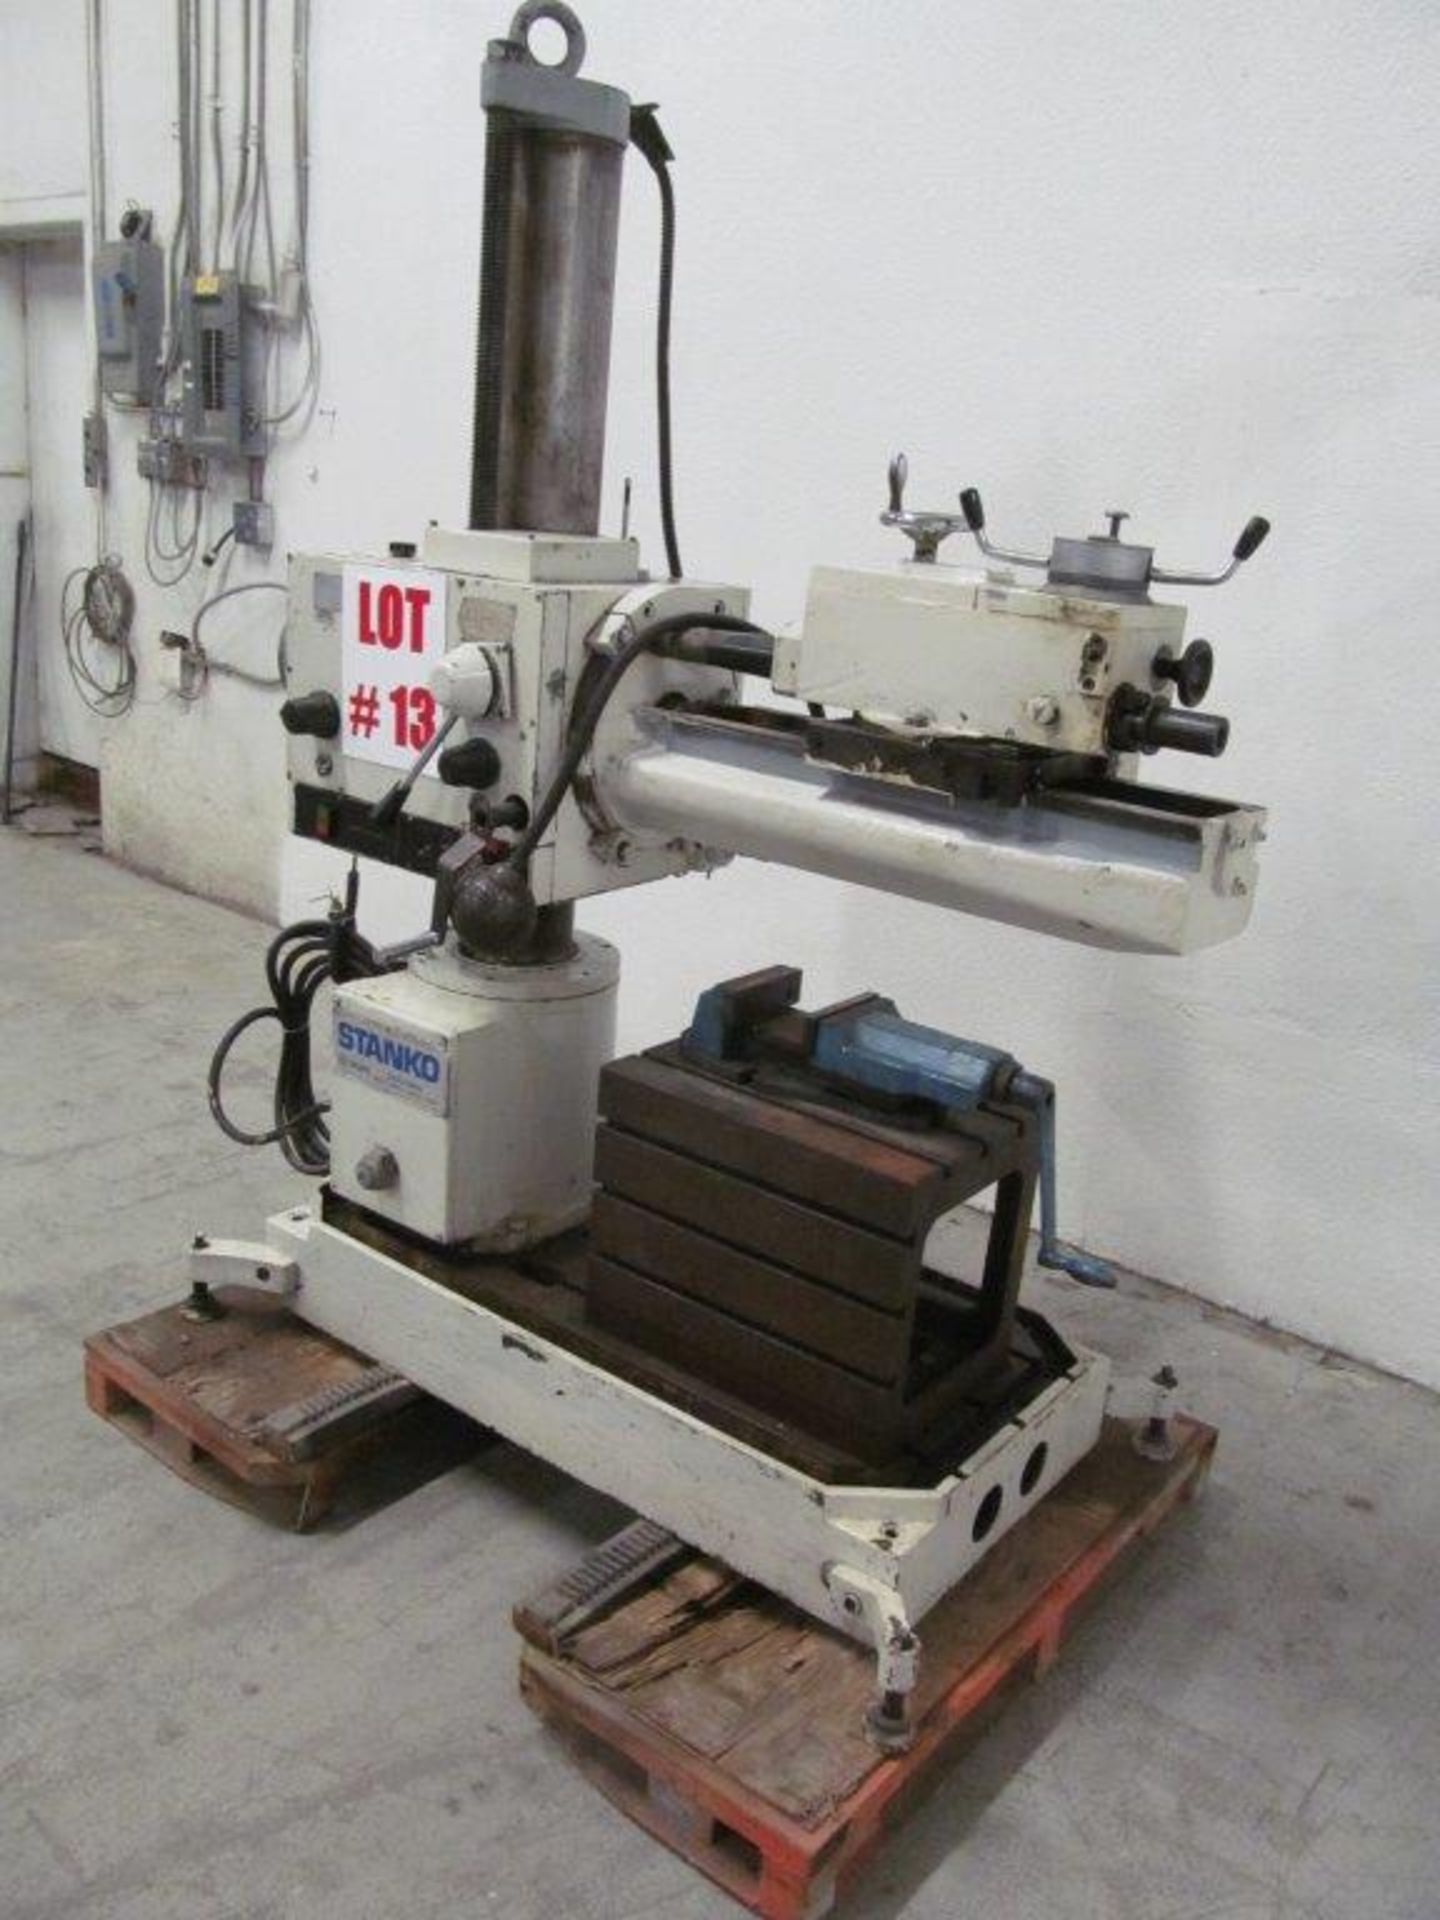 STANKO RADIAL DRILL MODEL 2K52-1, S/N: 1666, 34" ARM, ELECTRICS: 480V/2PH/60C NOTE:CONDITION UNKNOWN - Image 3 of 3